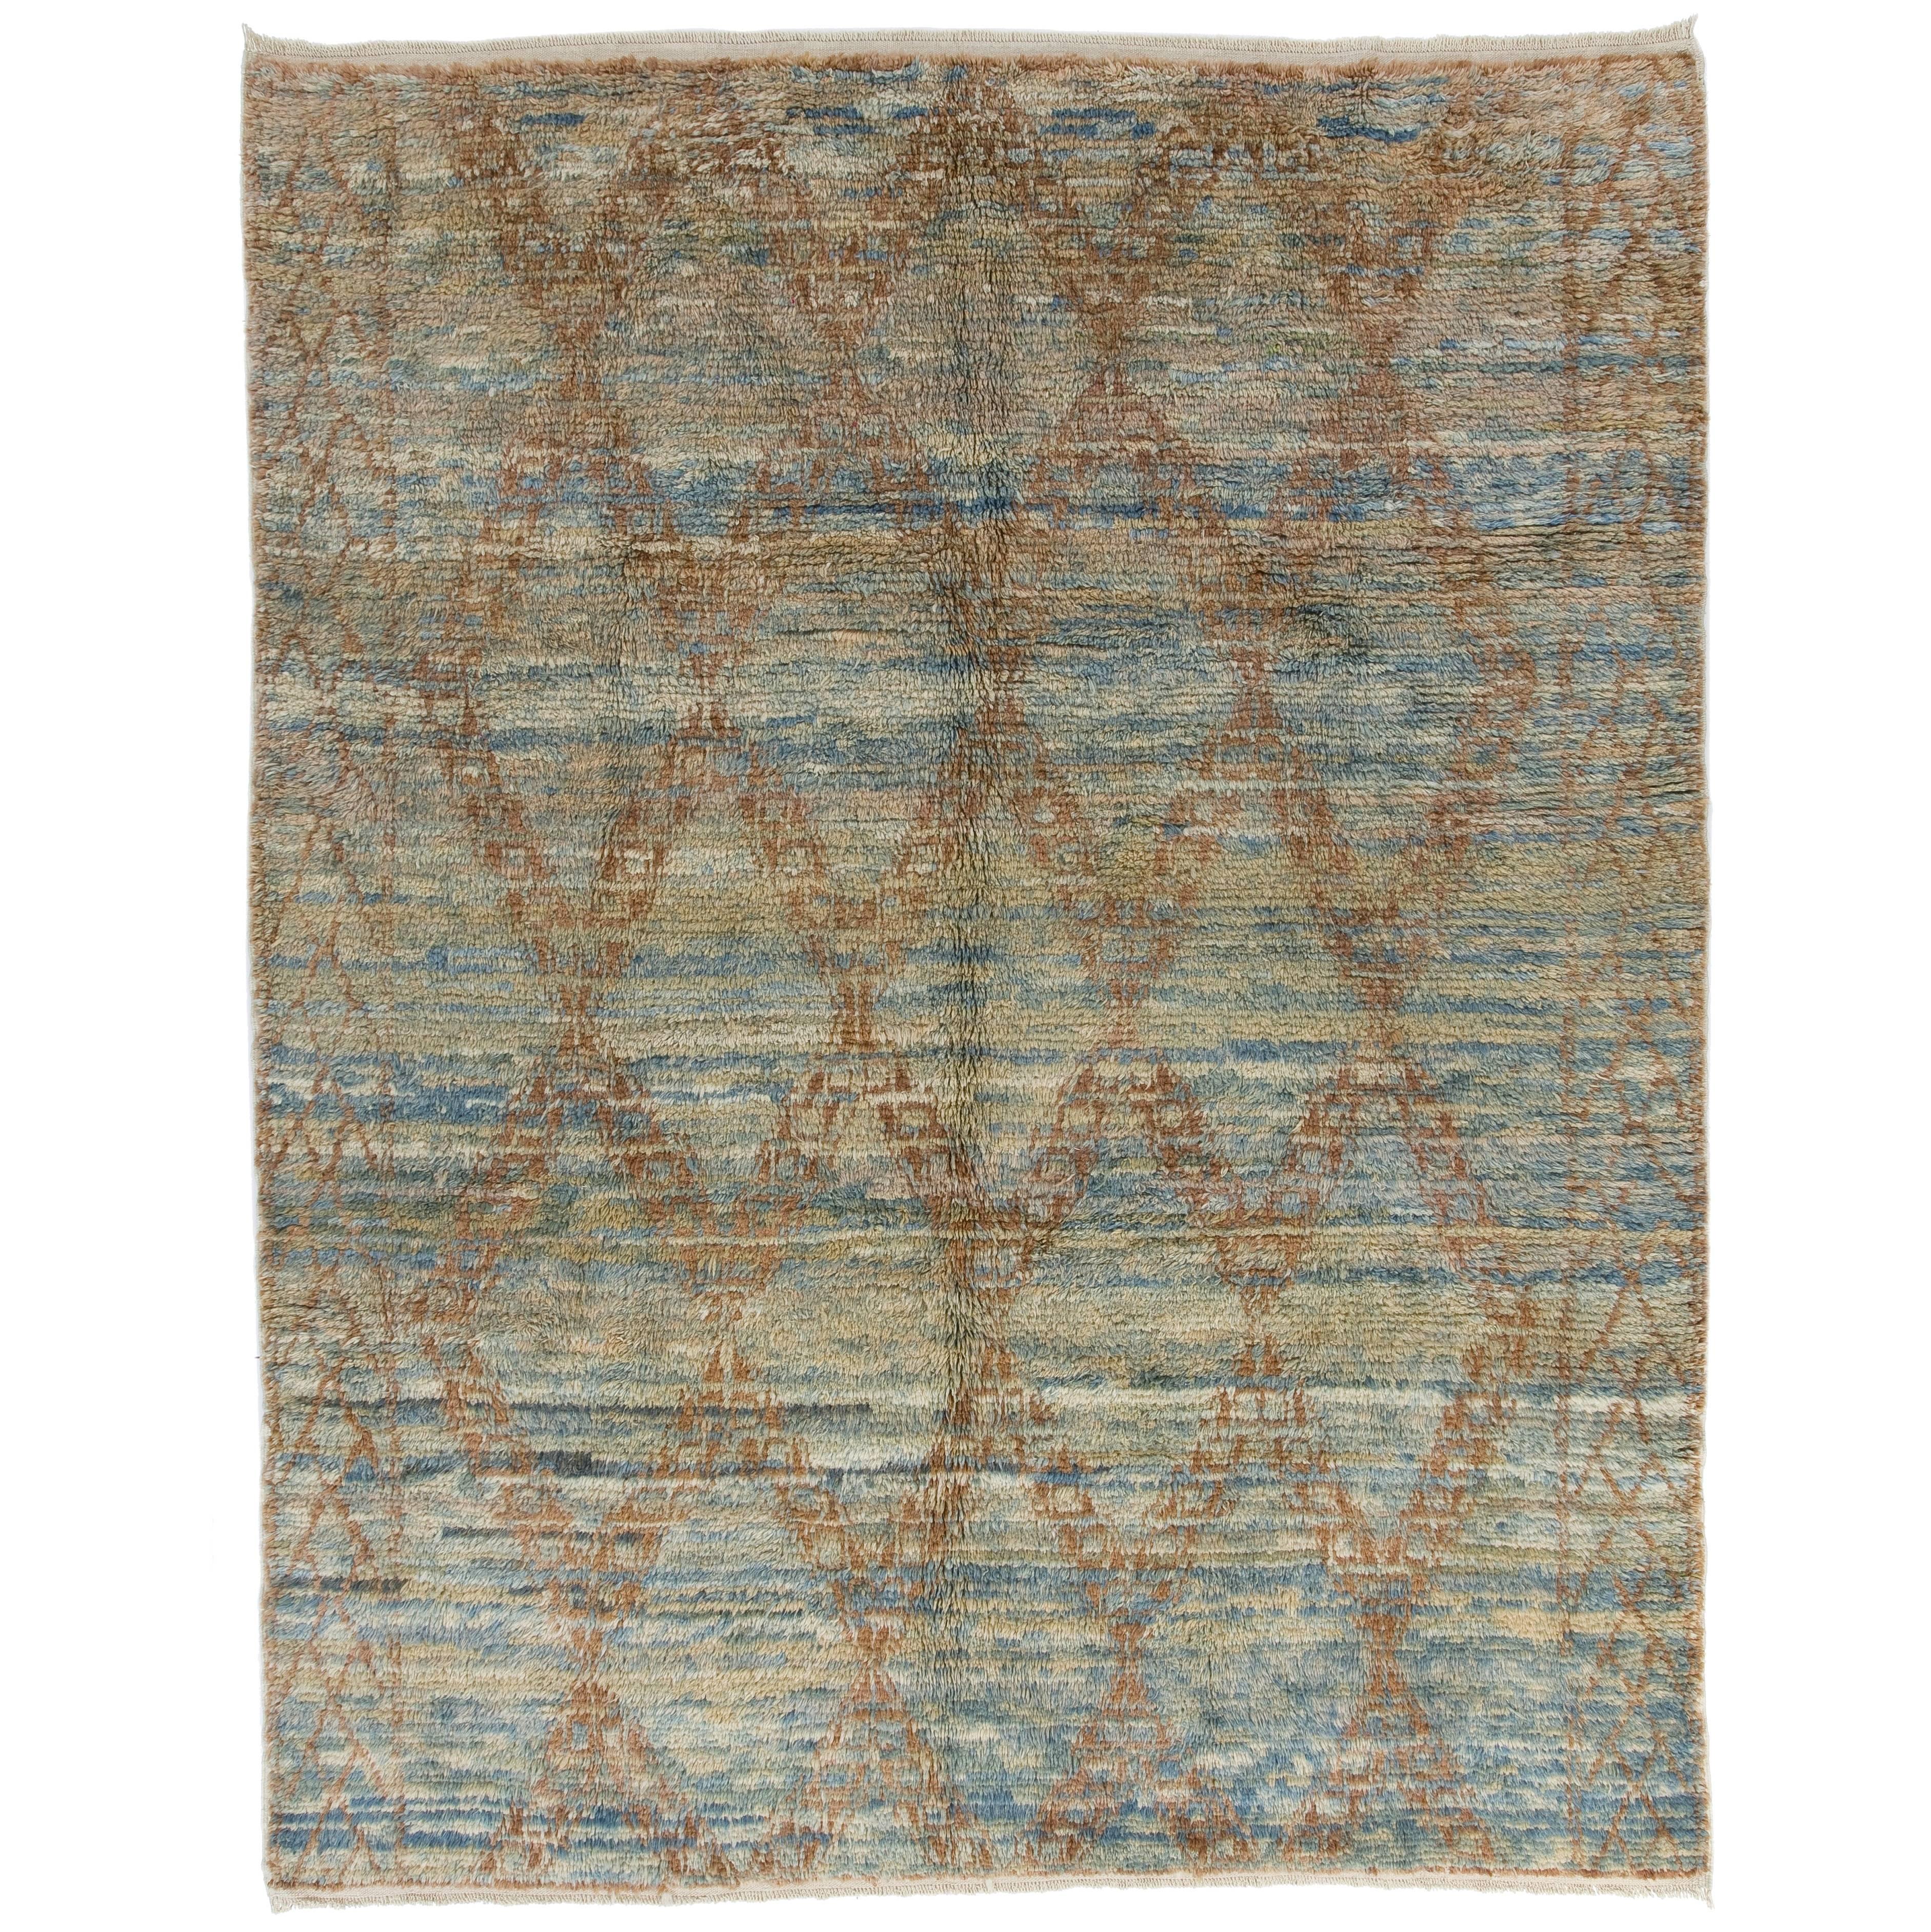 Handmade Moroccan Wool Rug in Soft Blue Green & Rust, Custom Options Available 